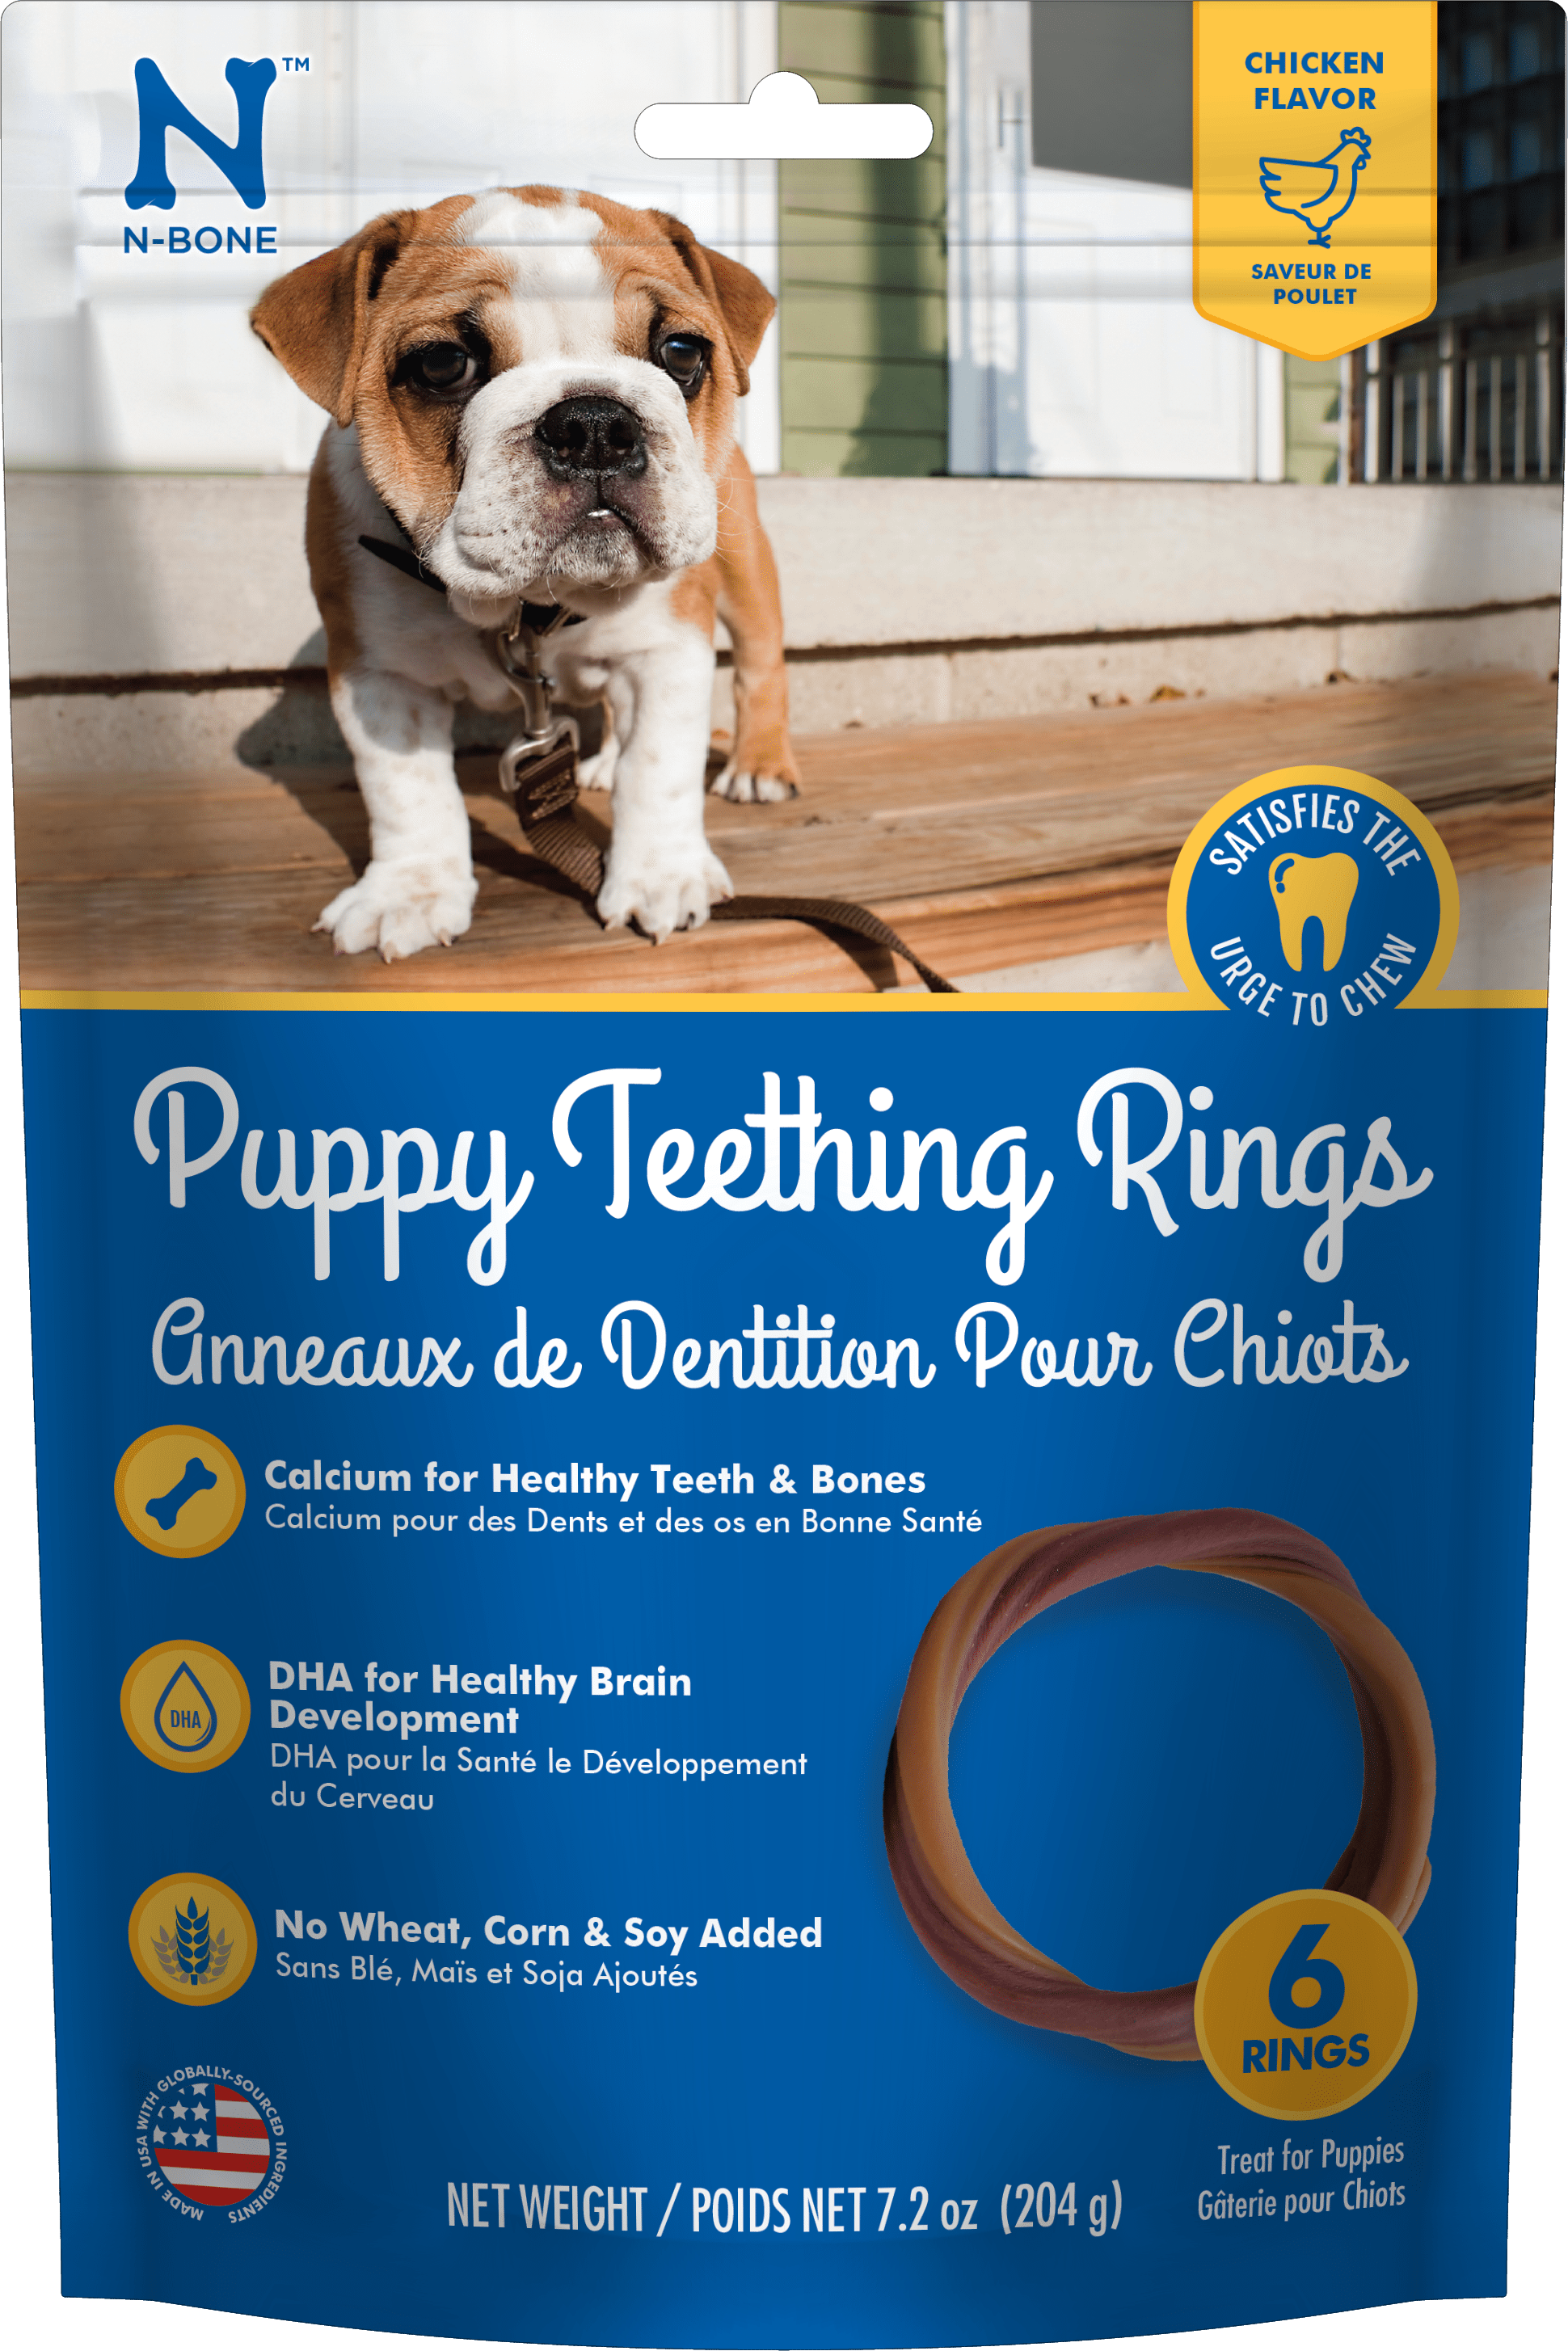 What is a C-ring? How do you use it? – Frenchie